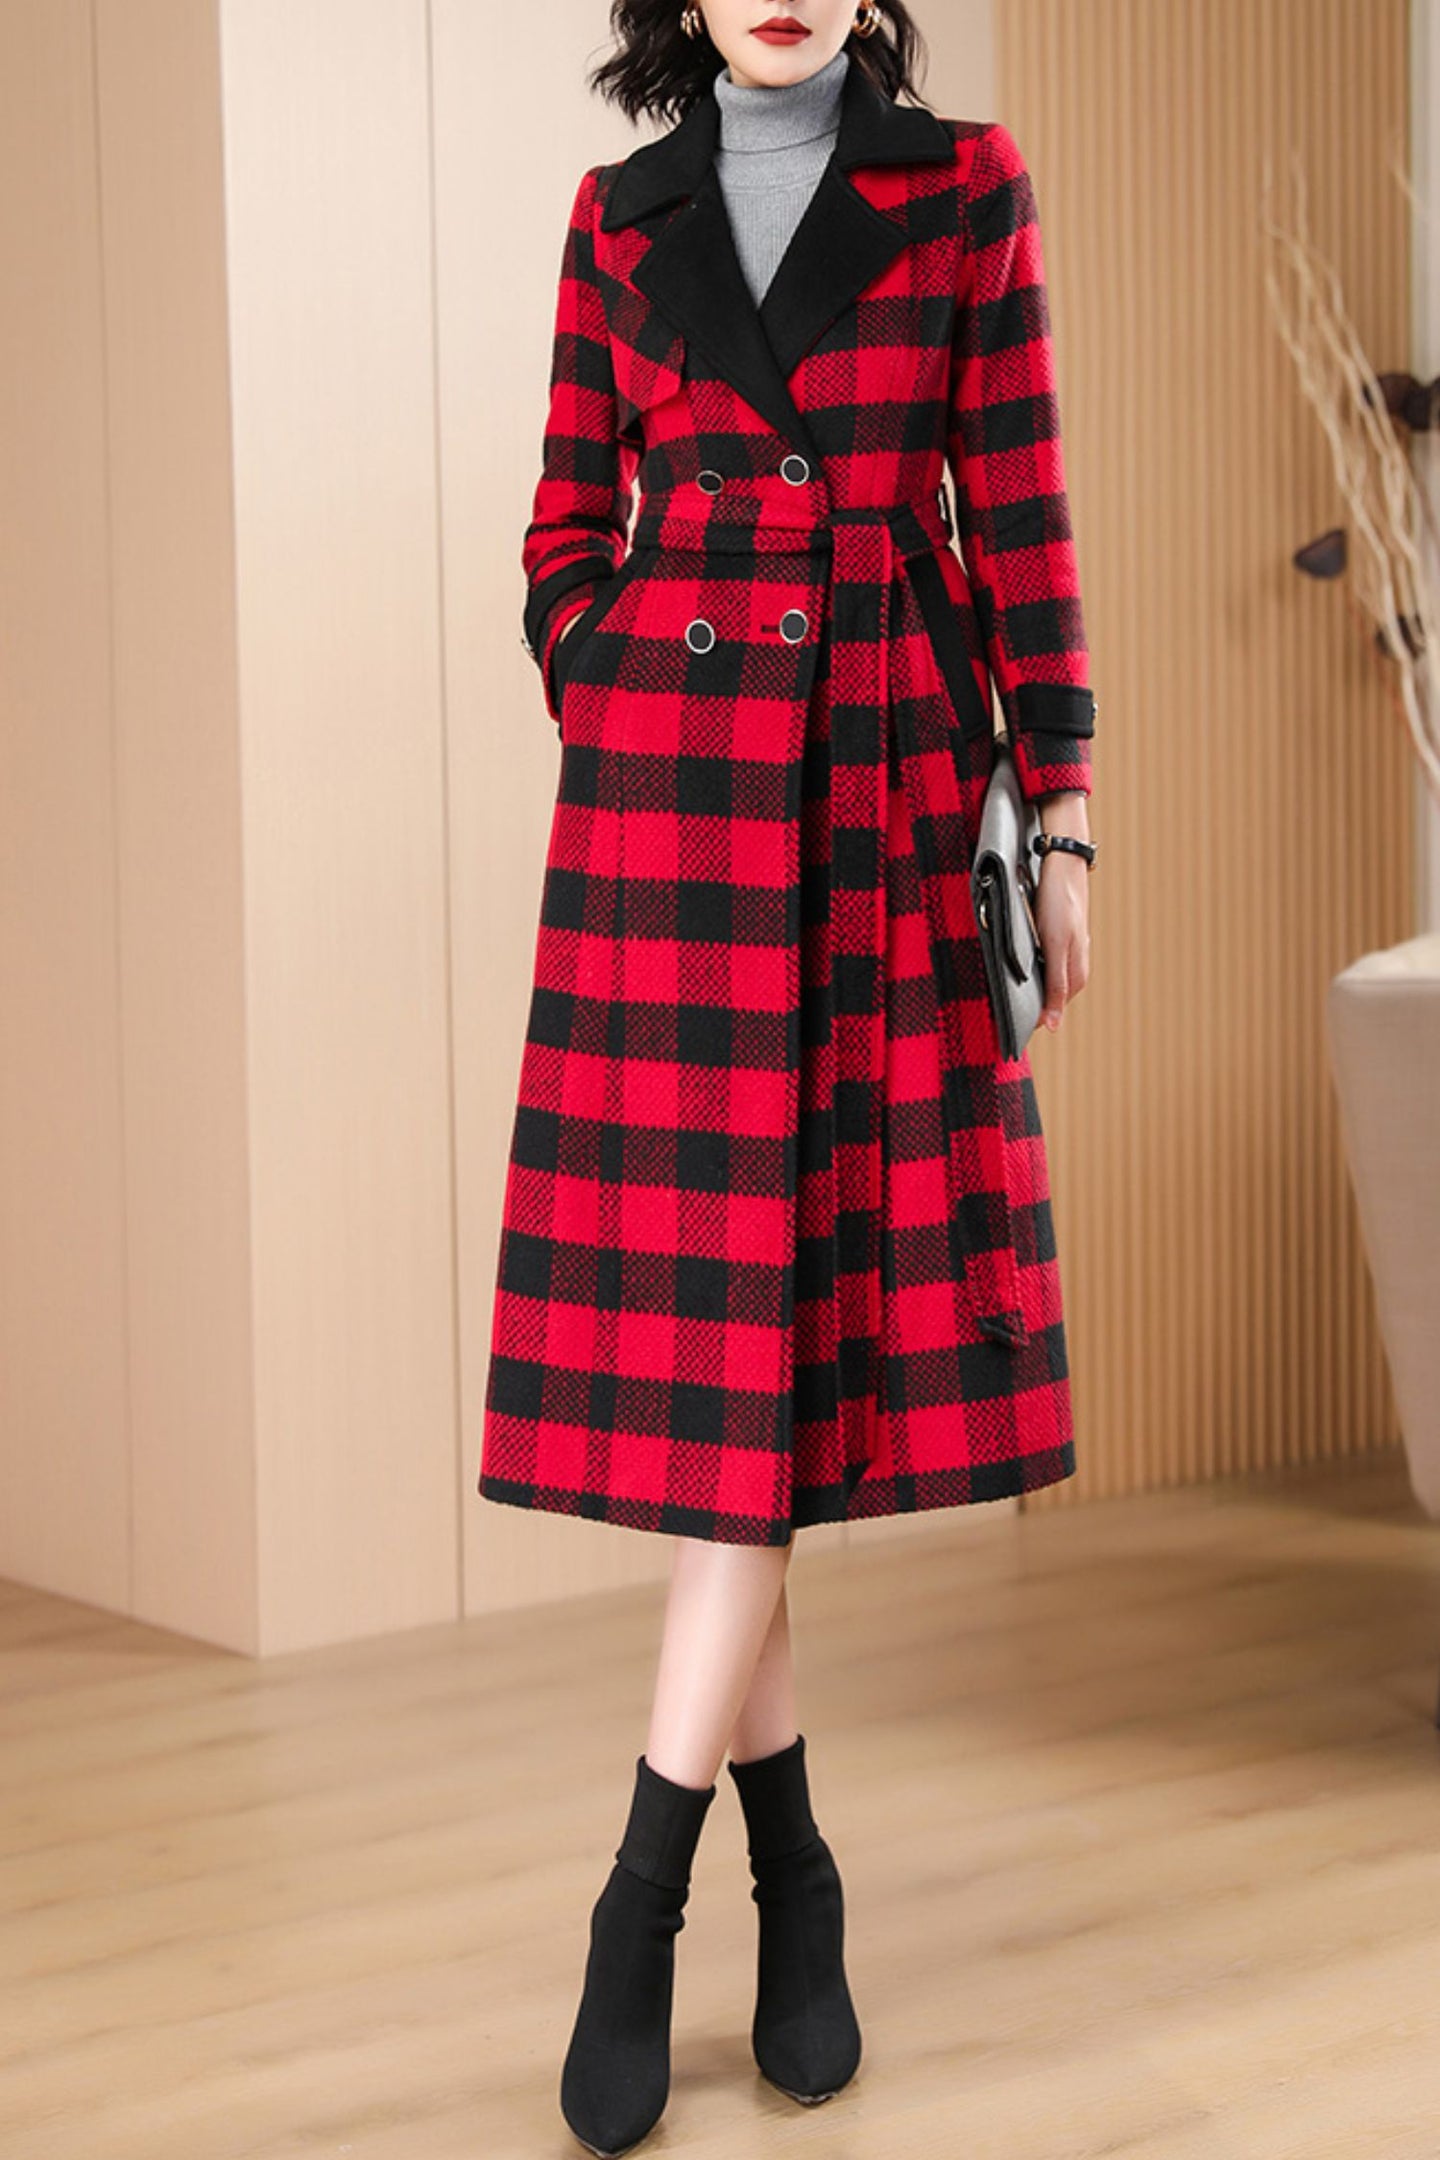 Women's Autumn and winter red plaid wool coat C4210